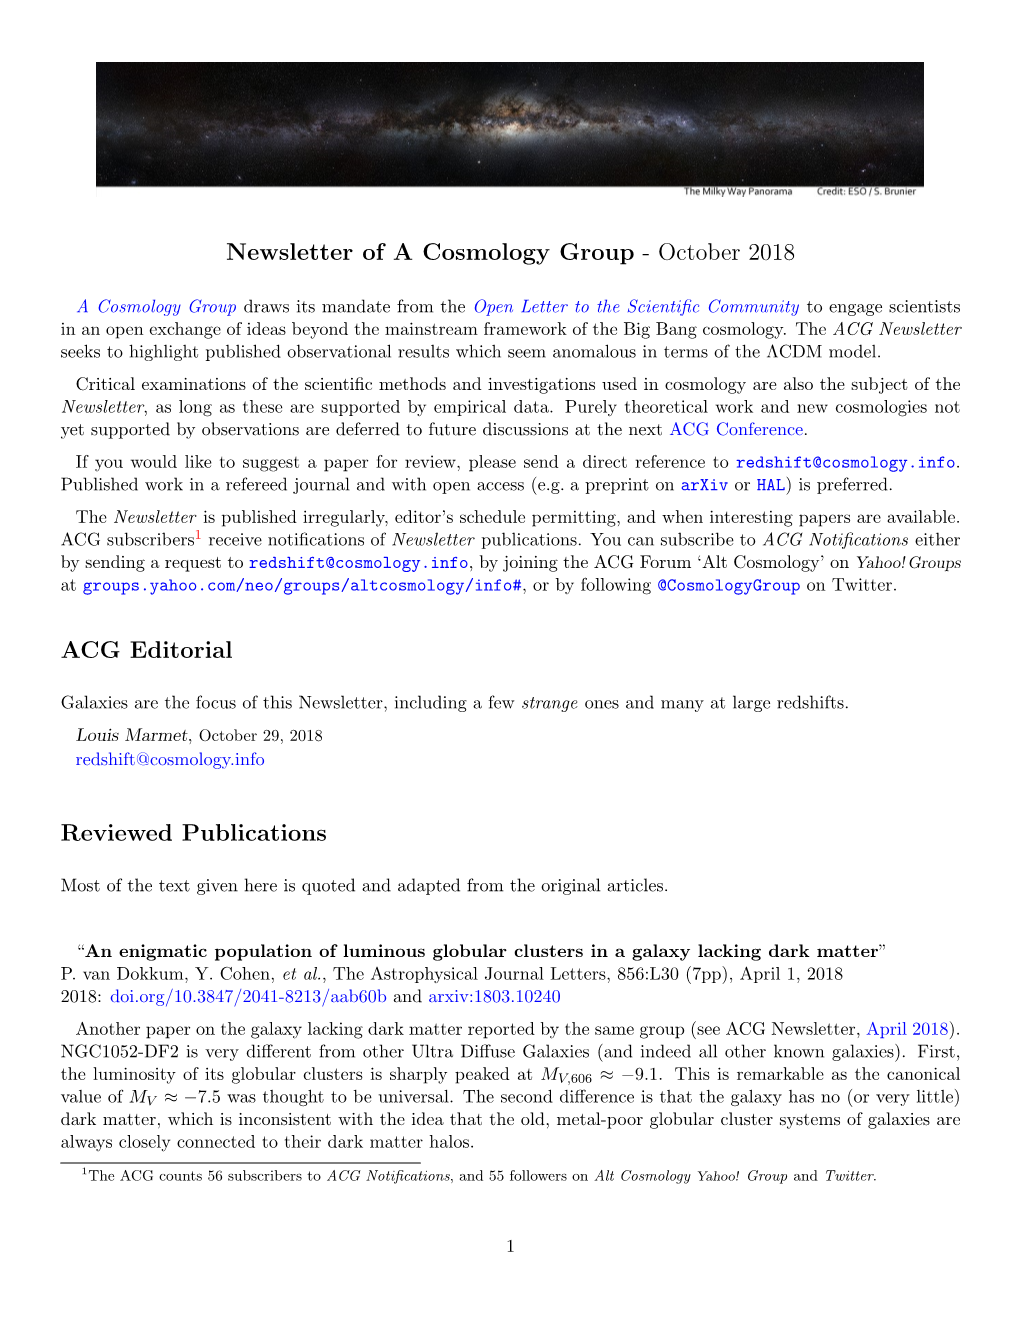 ACG Newsletter Seeks to Highlight Published Observational Results Which Seem Anomalous in Terms of the ΛCDM Model